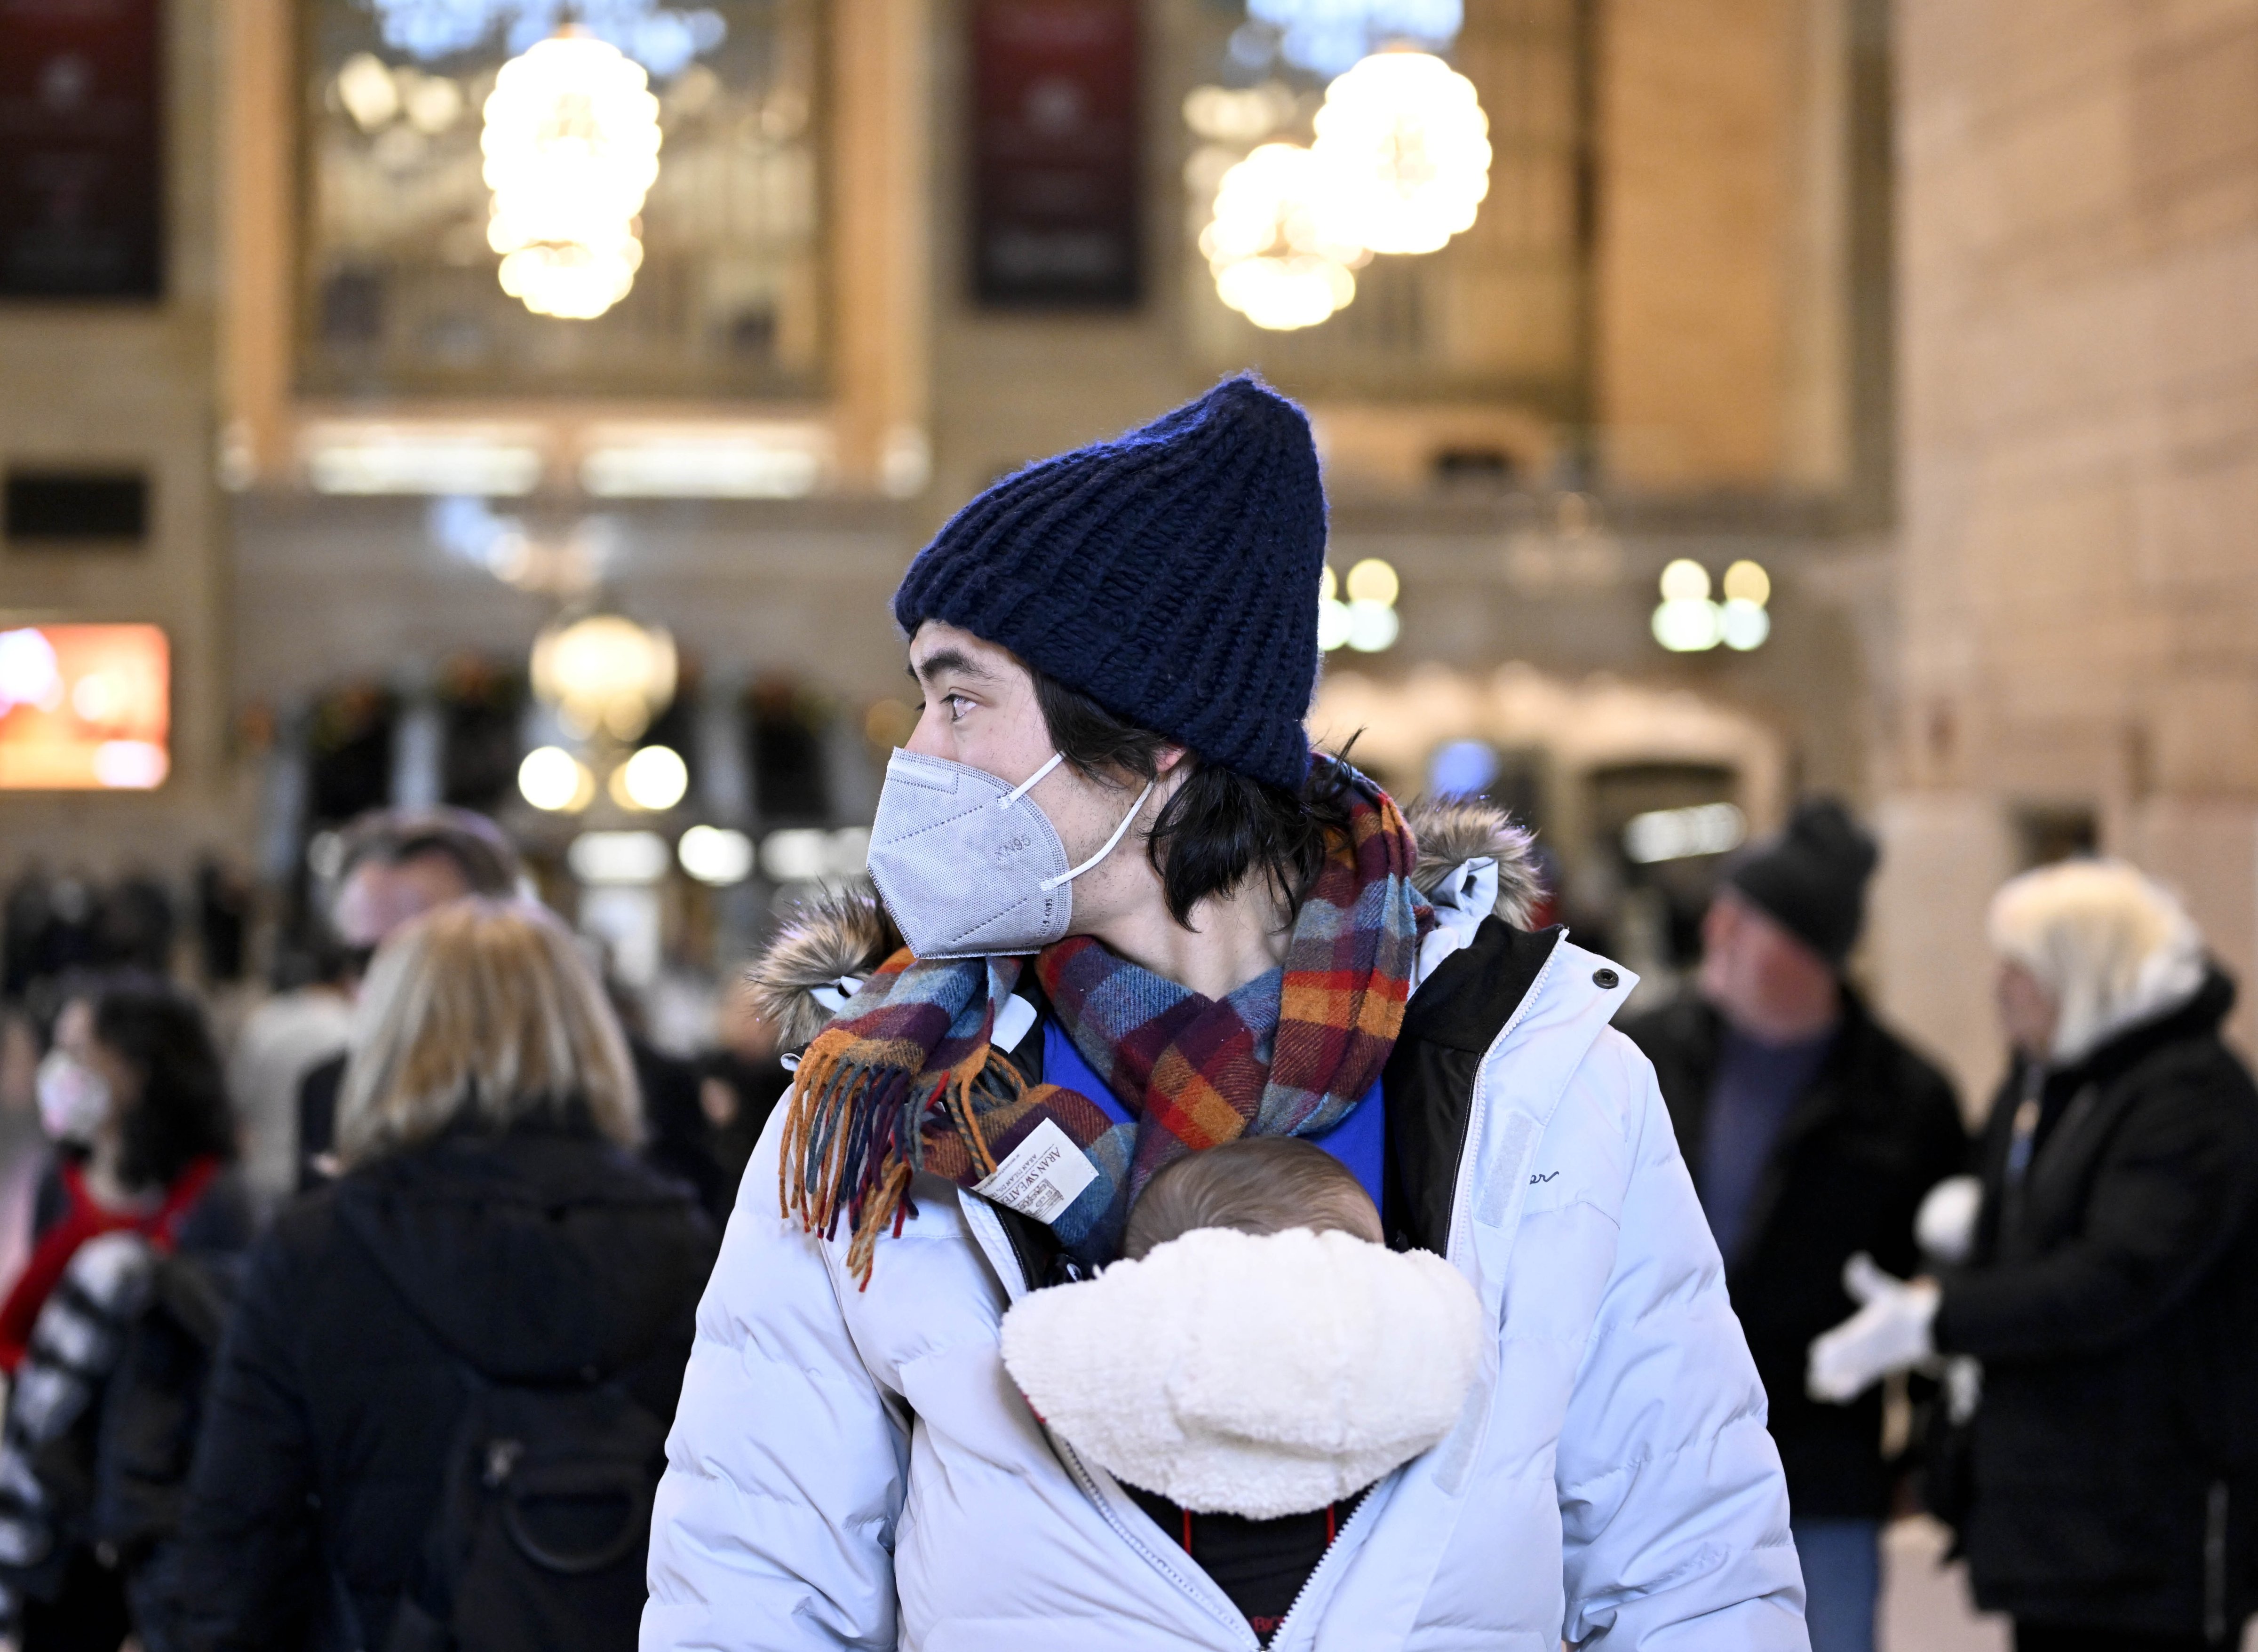 People wear masks after New York City's health officials issued an advisory, strongly urging New Yorkers to use masks as COVID-19, flu, and RSV cases rise, on December 12 in New York, United States. (Fatih Aktas/Anadolu Agency via Getty Images)